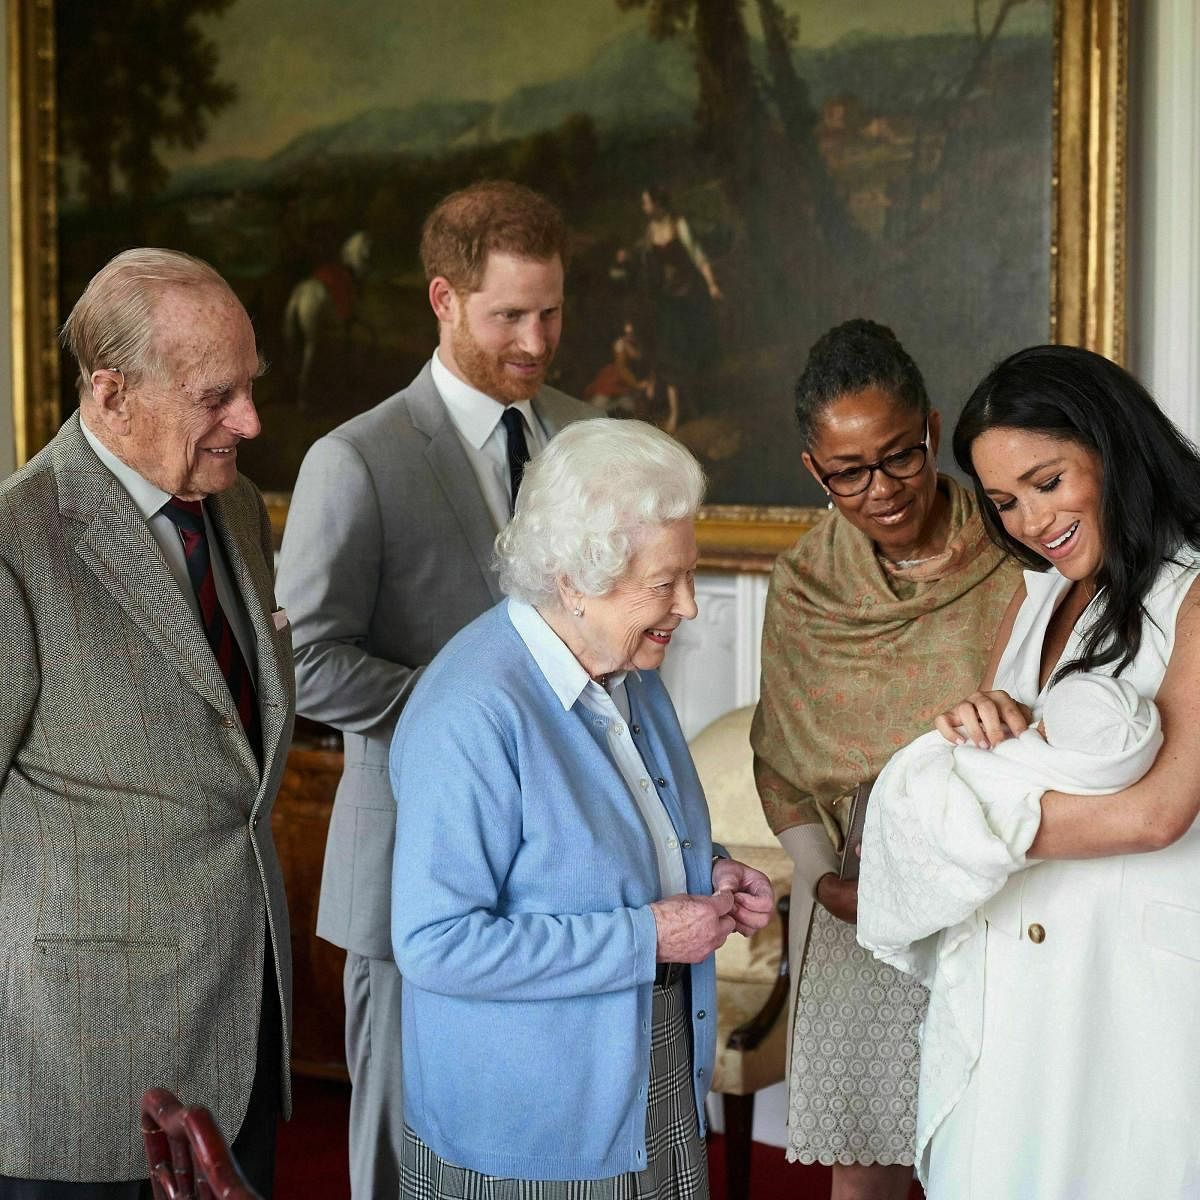 Archie is the first mixed race baby in a monarchy that dates back centuries. (Photo: RoyalSussex/AP/PTI)